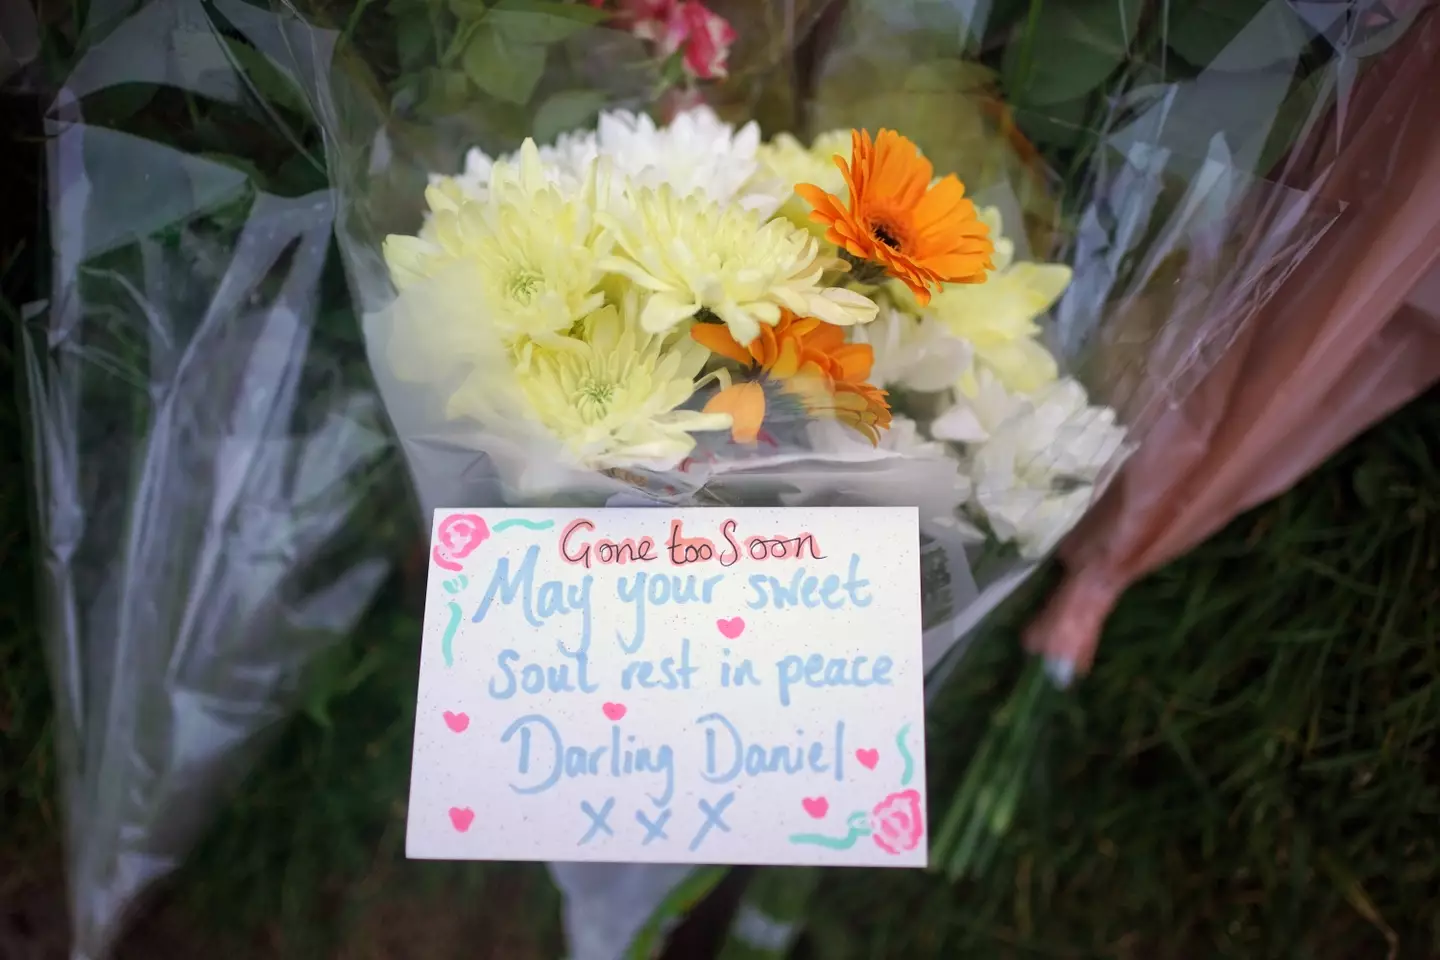 Daniel was a 'much-loved' pupil at his school. (PA)